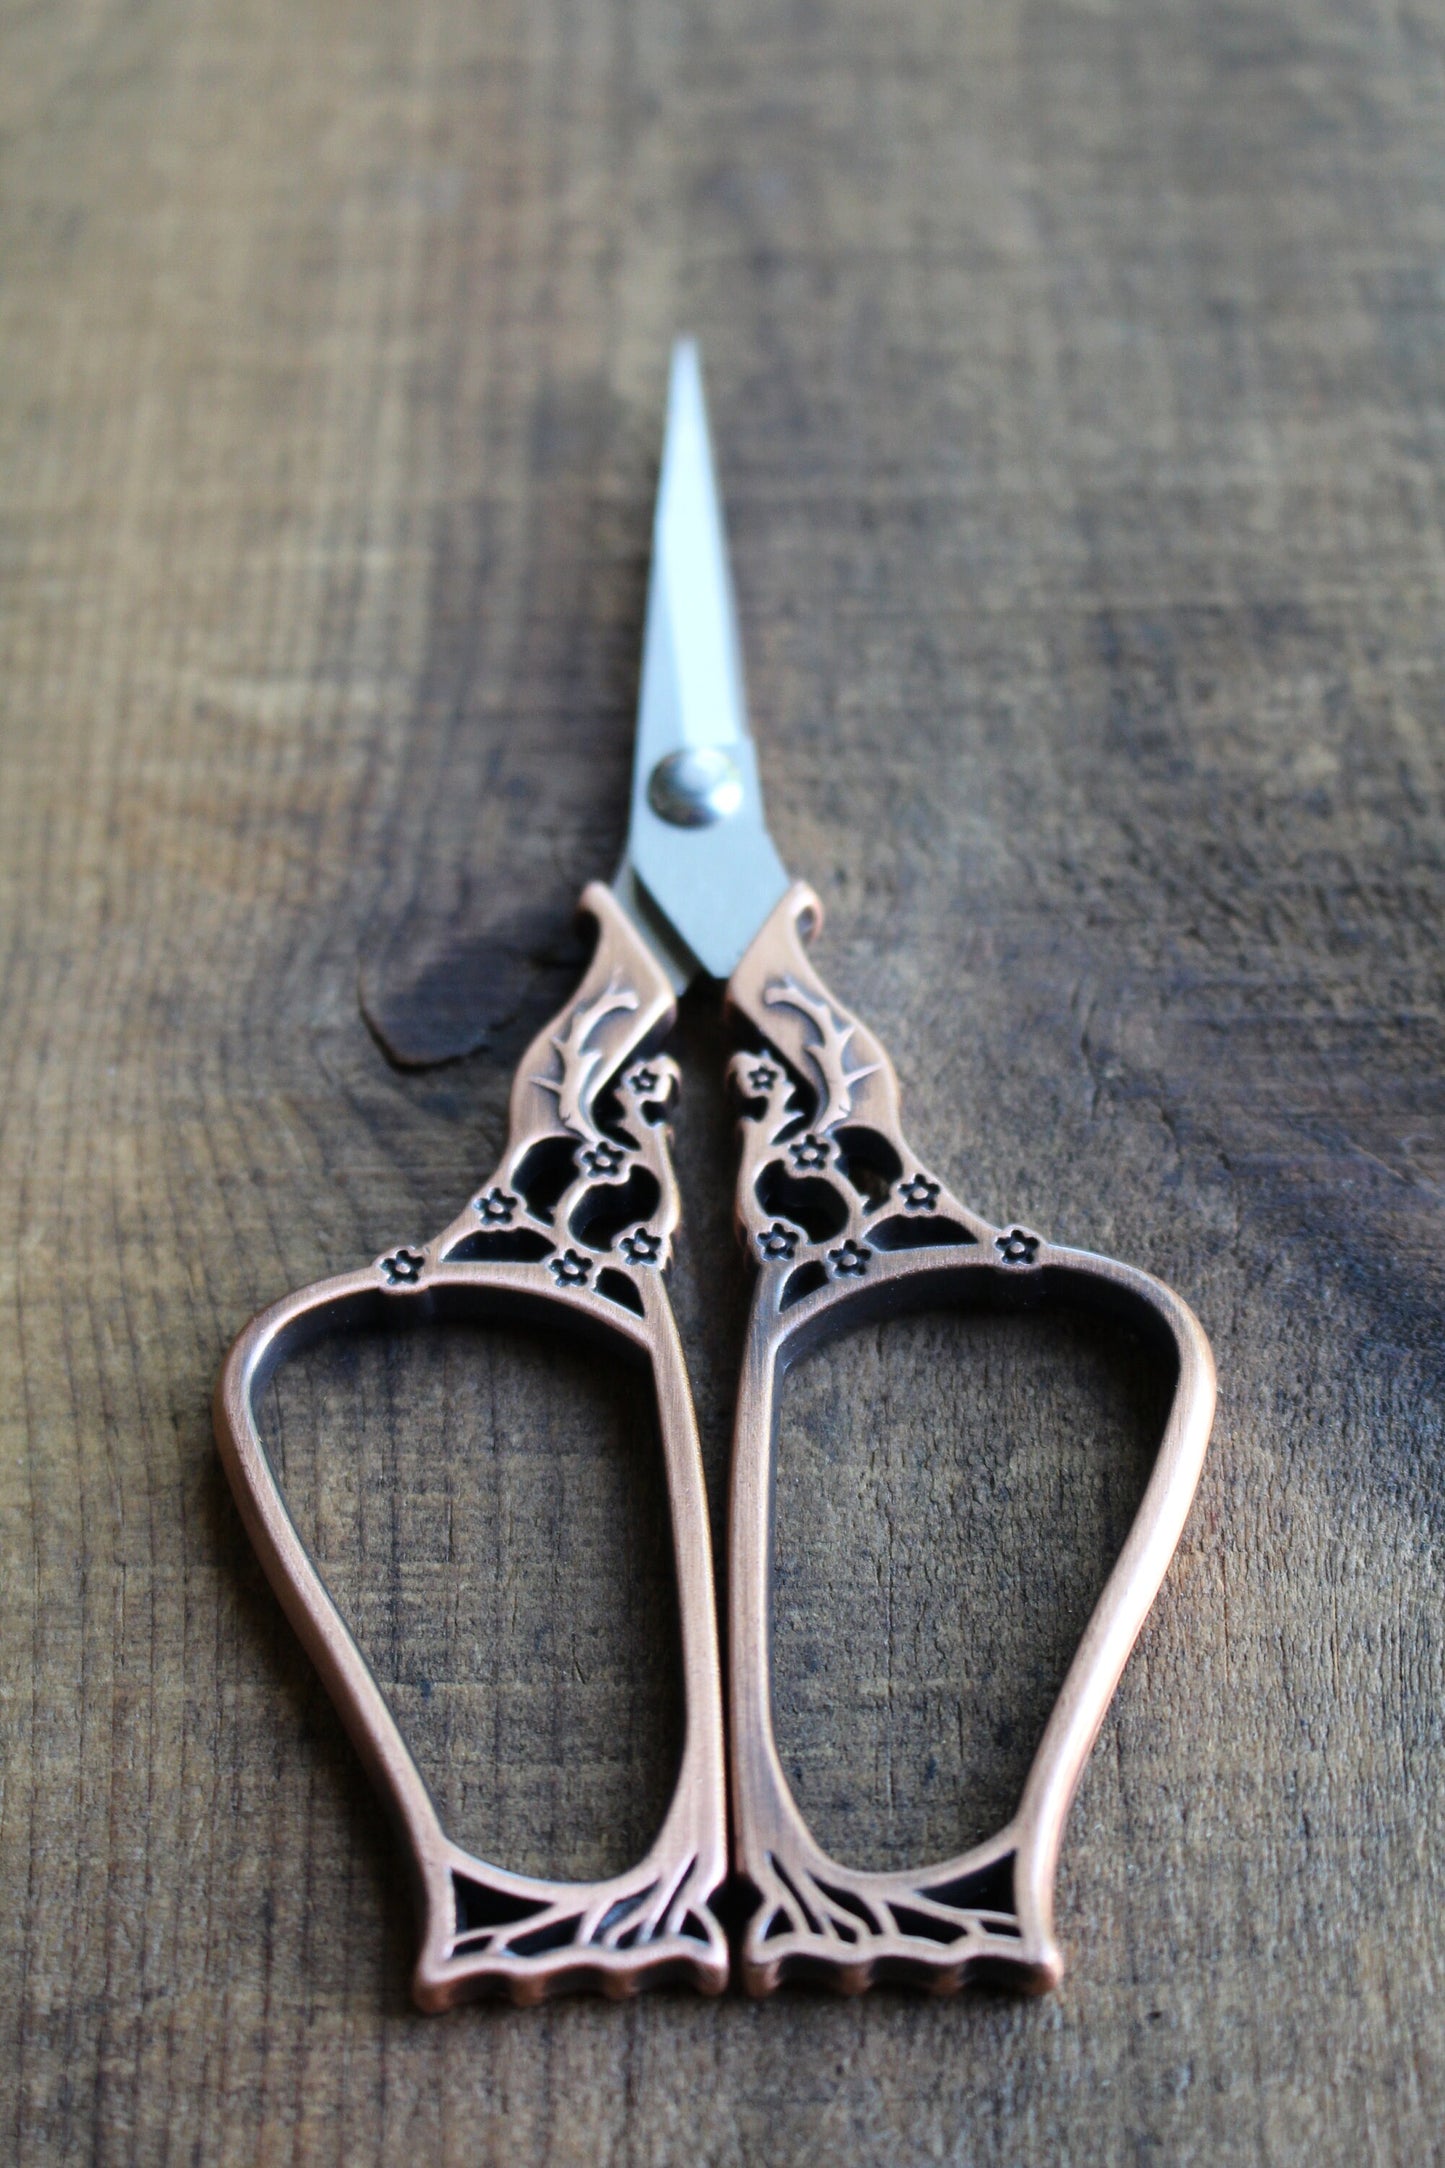 Cherry Blossom Embroidery Scissors • Rustic Vintage Style Quilting Scissors in Antique Copper Finish • Unique Gift for Quilters